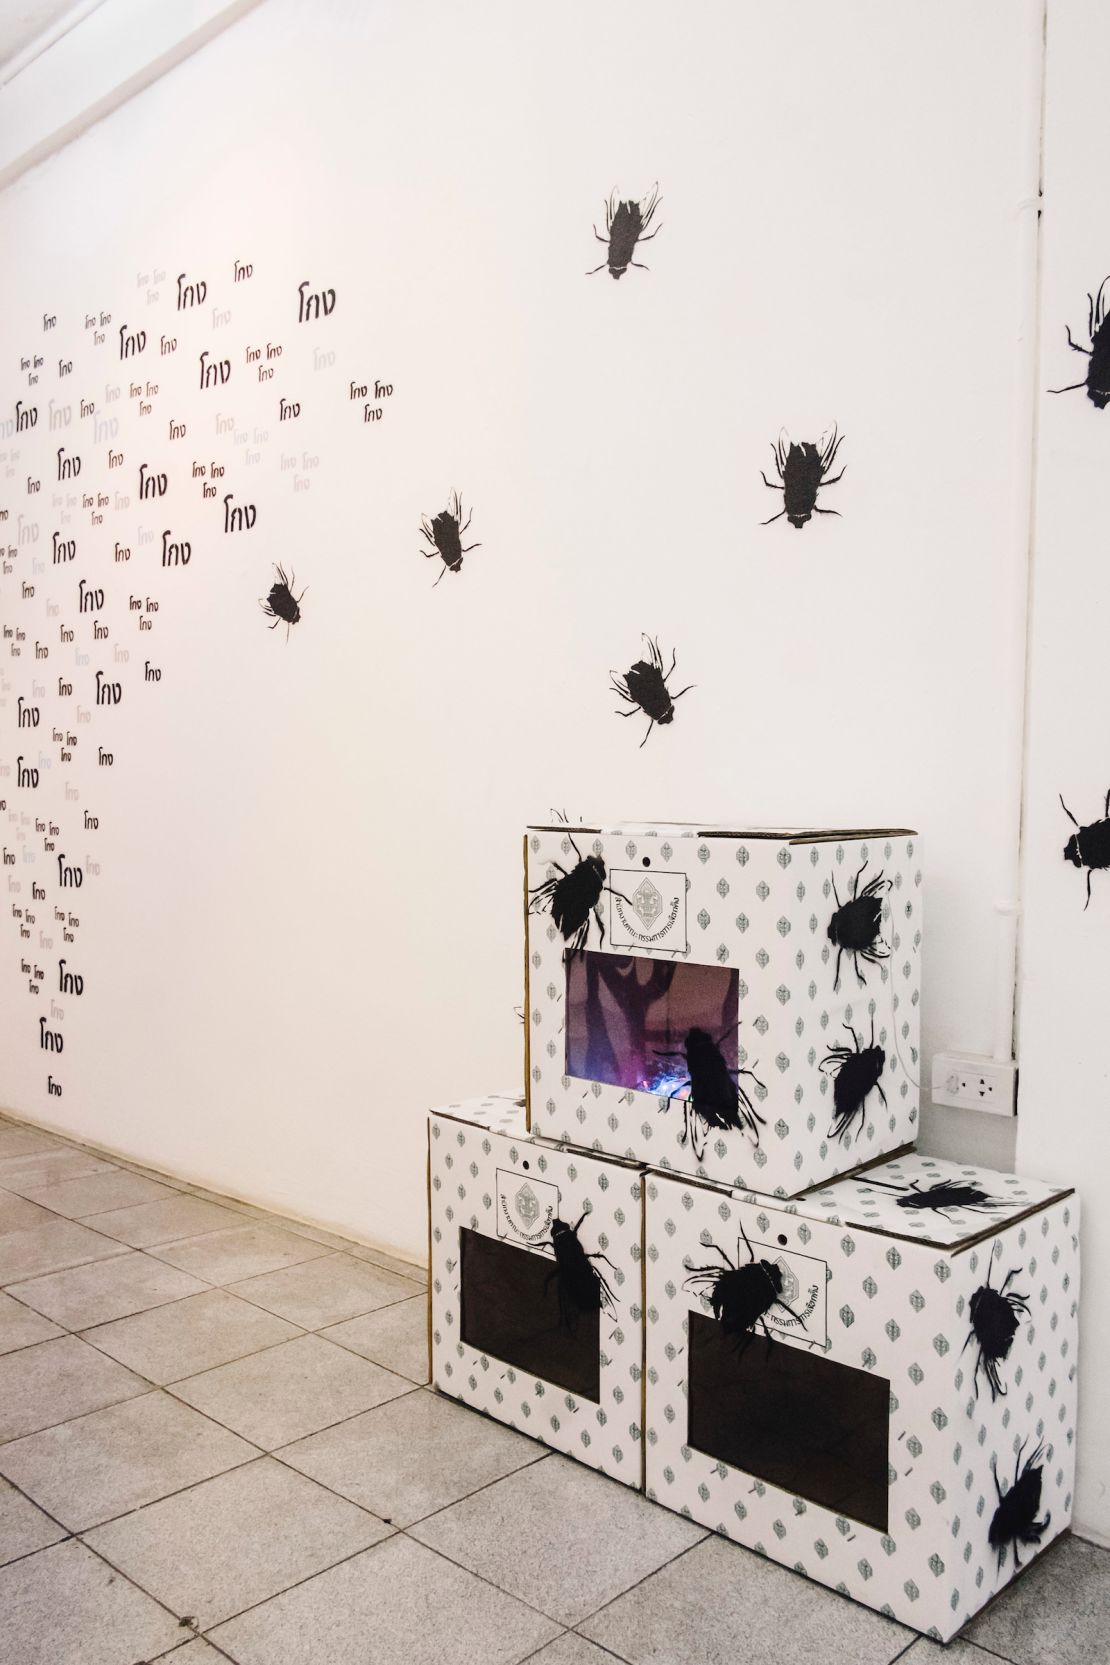 Images of flies represent the artist's view that the upcoming elections are "dirty."